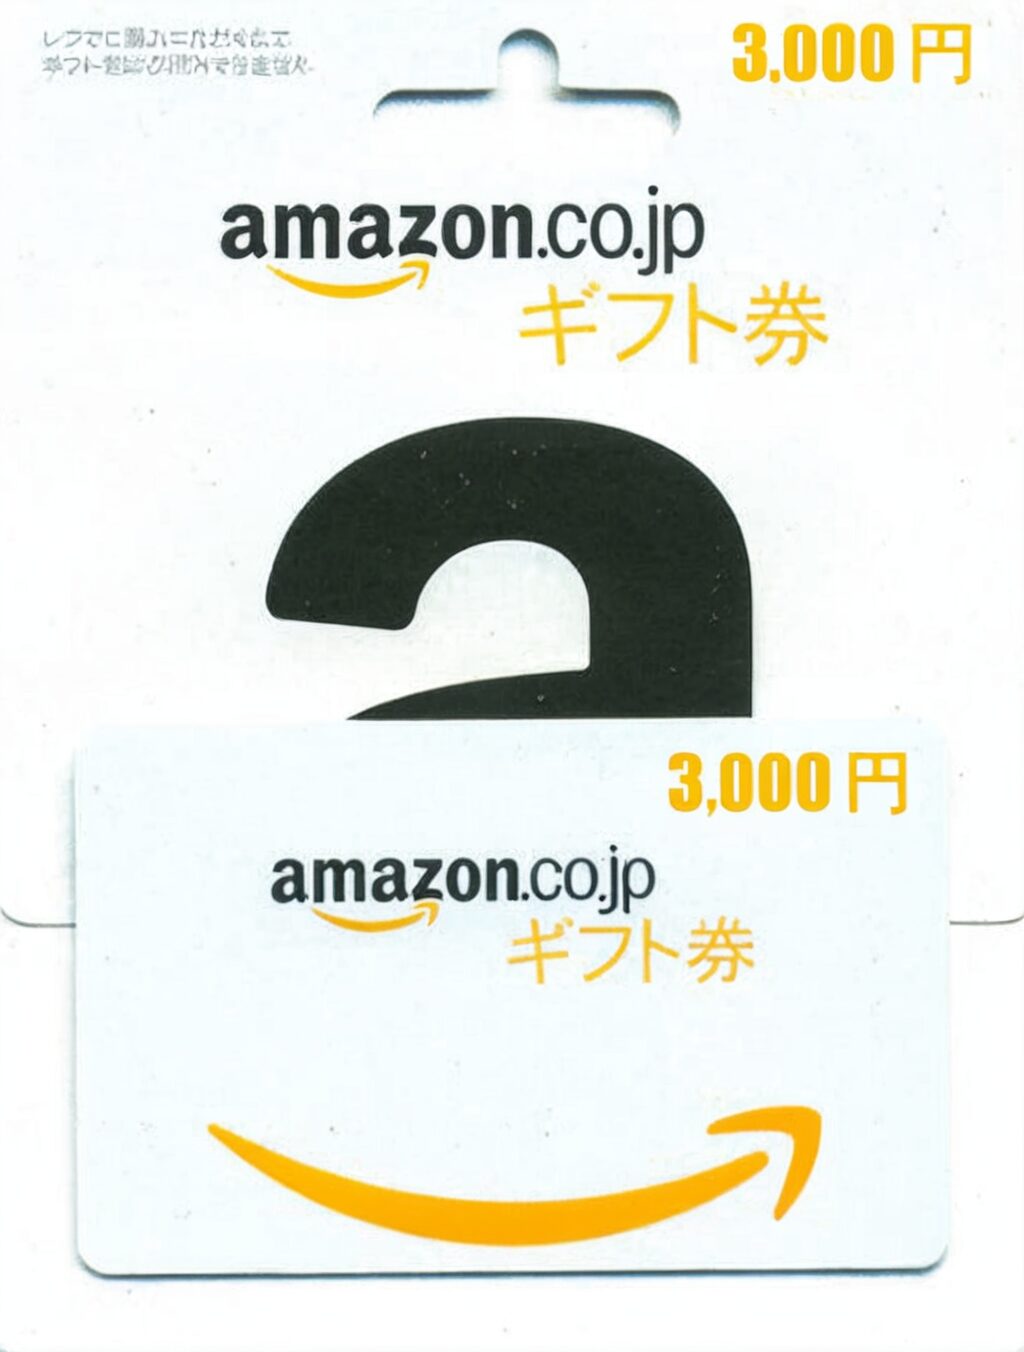 gift cards in japanese